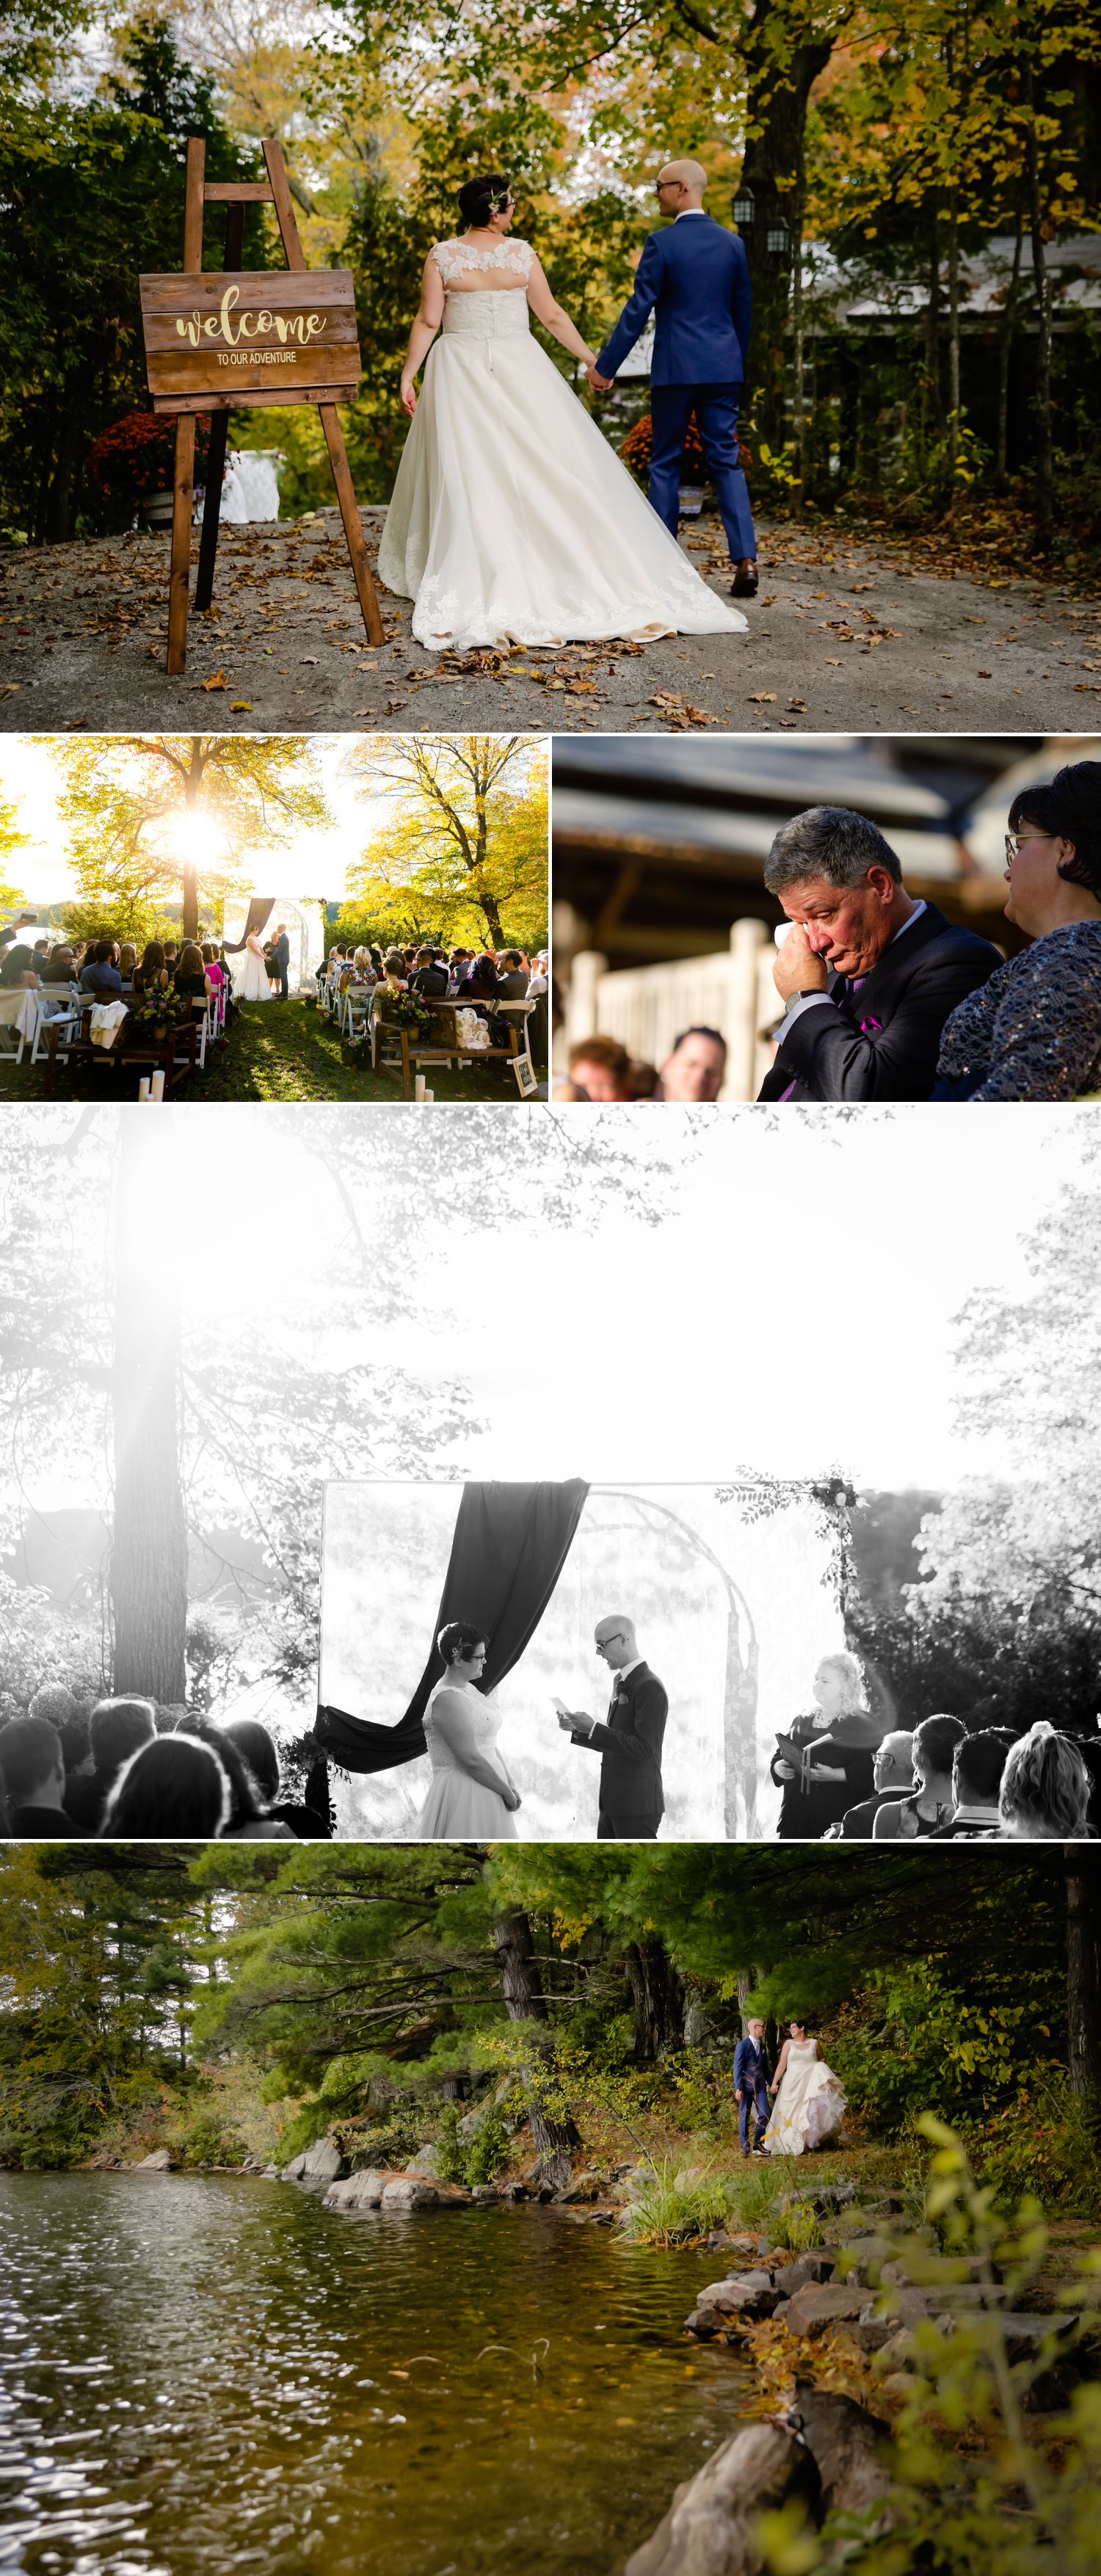 An outdoor wedding ceremony taking place in the fall at La Grange de la Gatineau